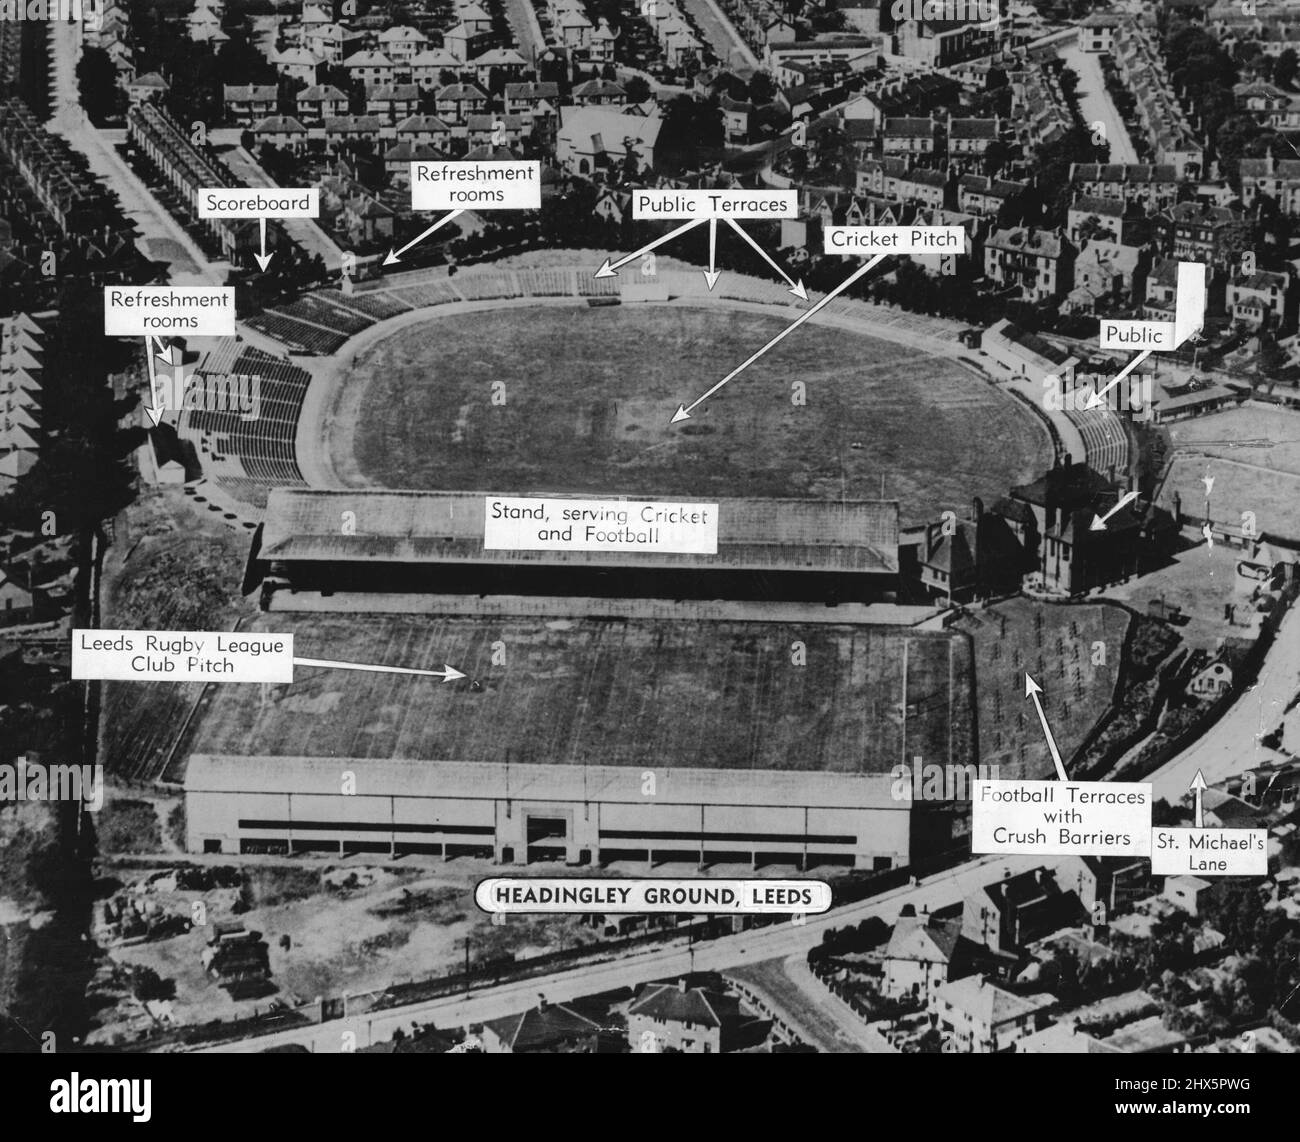 Headingley Ground, Leeds Refreshment Rooms, Scoreboard, Refreshment Rooms, Public Terraces, Cricket Pitch, Winter Coaching Shed, Public Terrace, Pavilion, Dressing Rooms and Members Stand.Football Terraces with Church barriers, St. Michael's Lane, Leeds Rugby League Club Pitch. May 05, 1948. Stock Photo